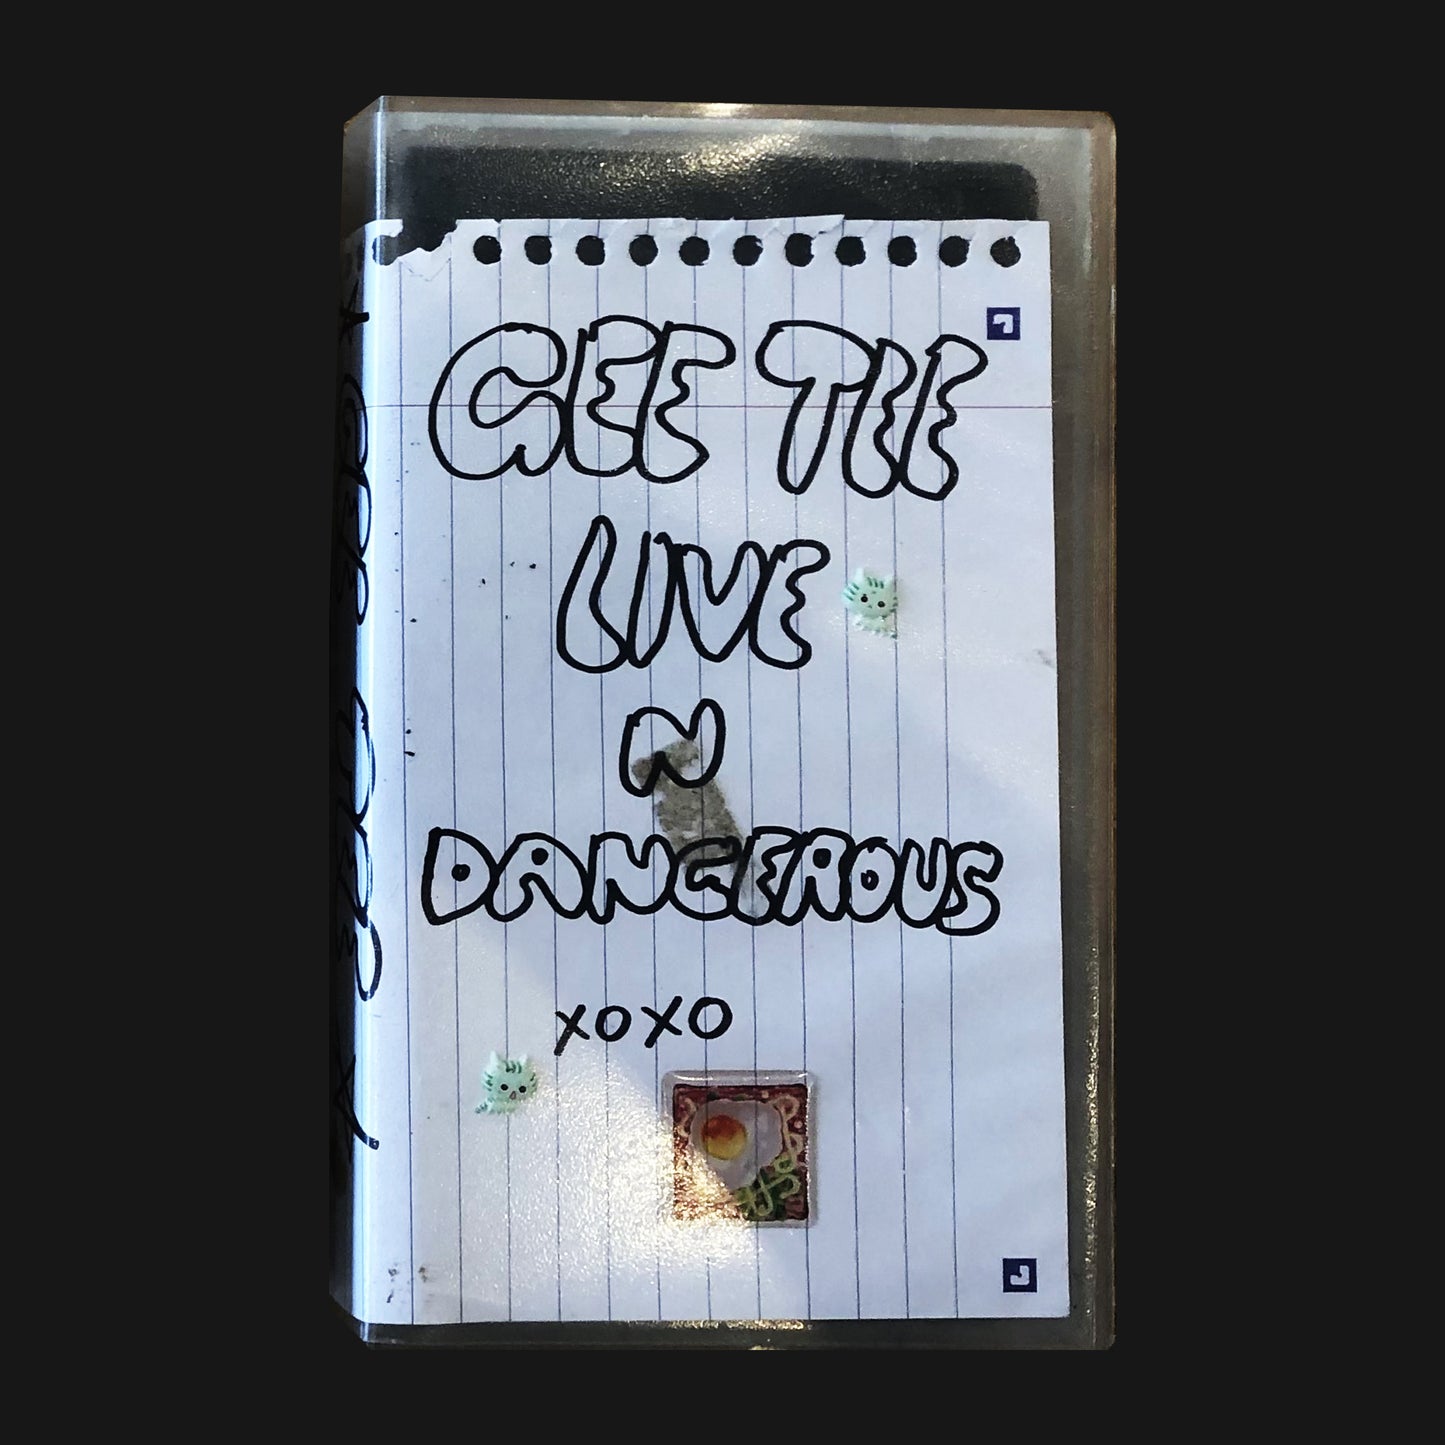 GEE TEE - "LIVE AND DANGEROUS II" VHS